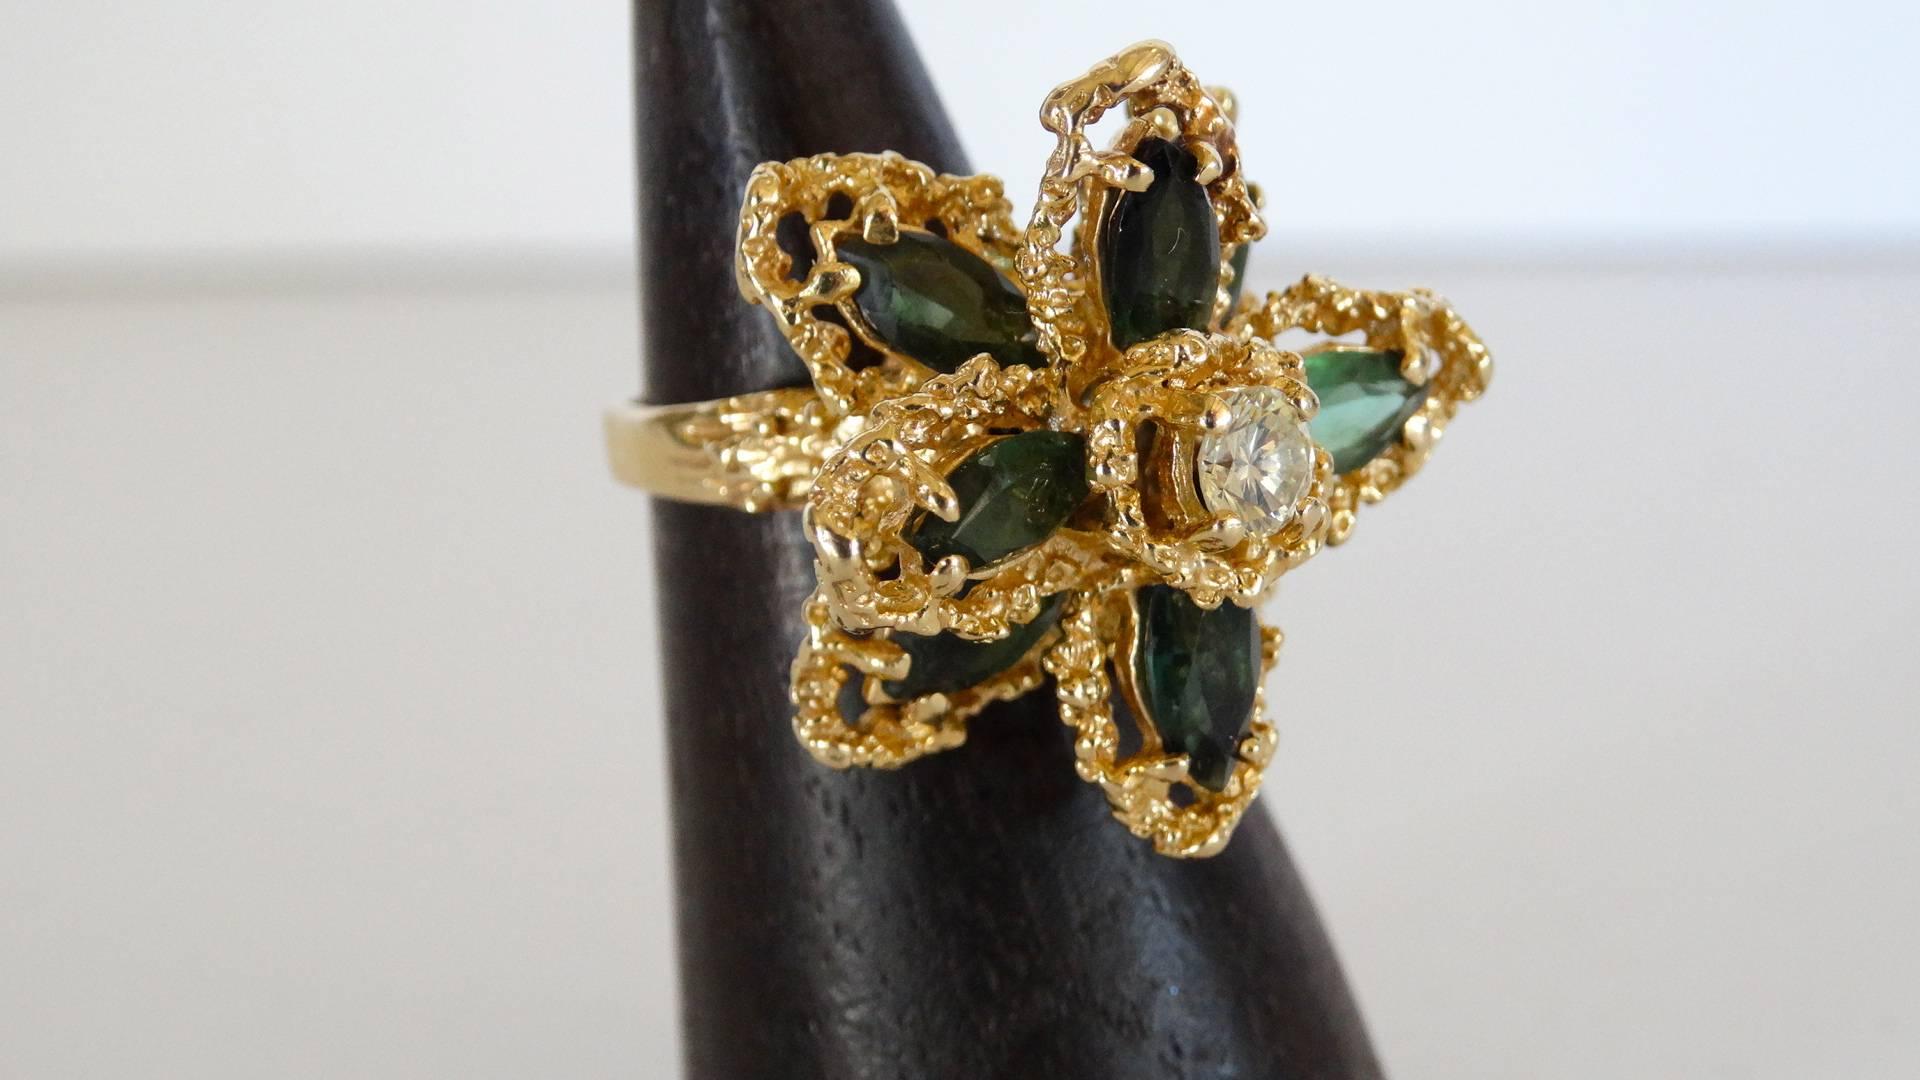  This beautiful flower ring is made with 18 karat gold, 3 carat total weight of green tourmaline and .40 carat diamond center stone. Total weight in grams is 10.85. This ring is a size 6, of course can be sized. Such a unique design. If you have any